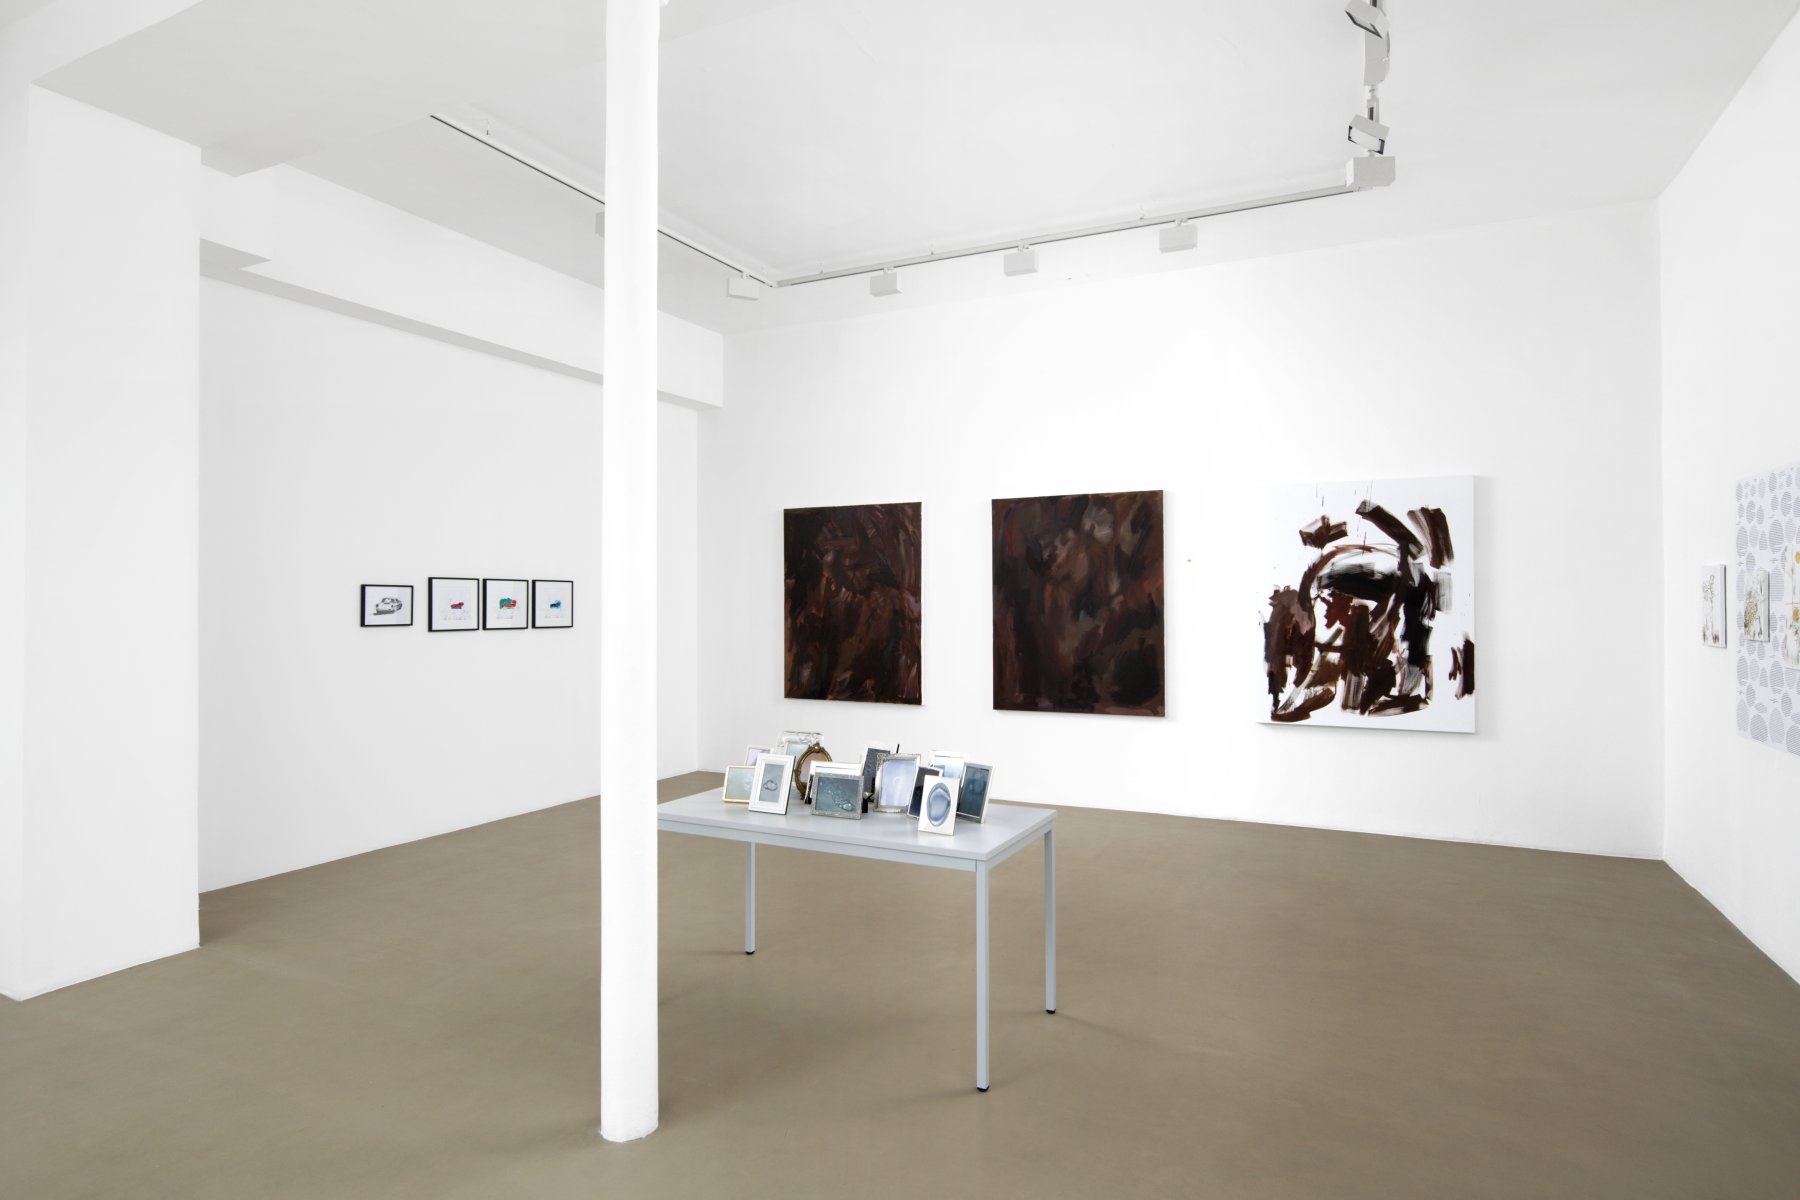 Installation image for Tous les jours, at Galerie Chantal Crousel